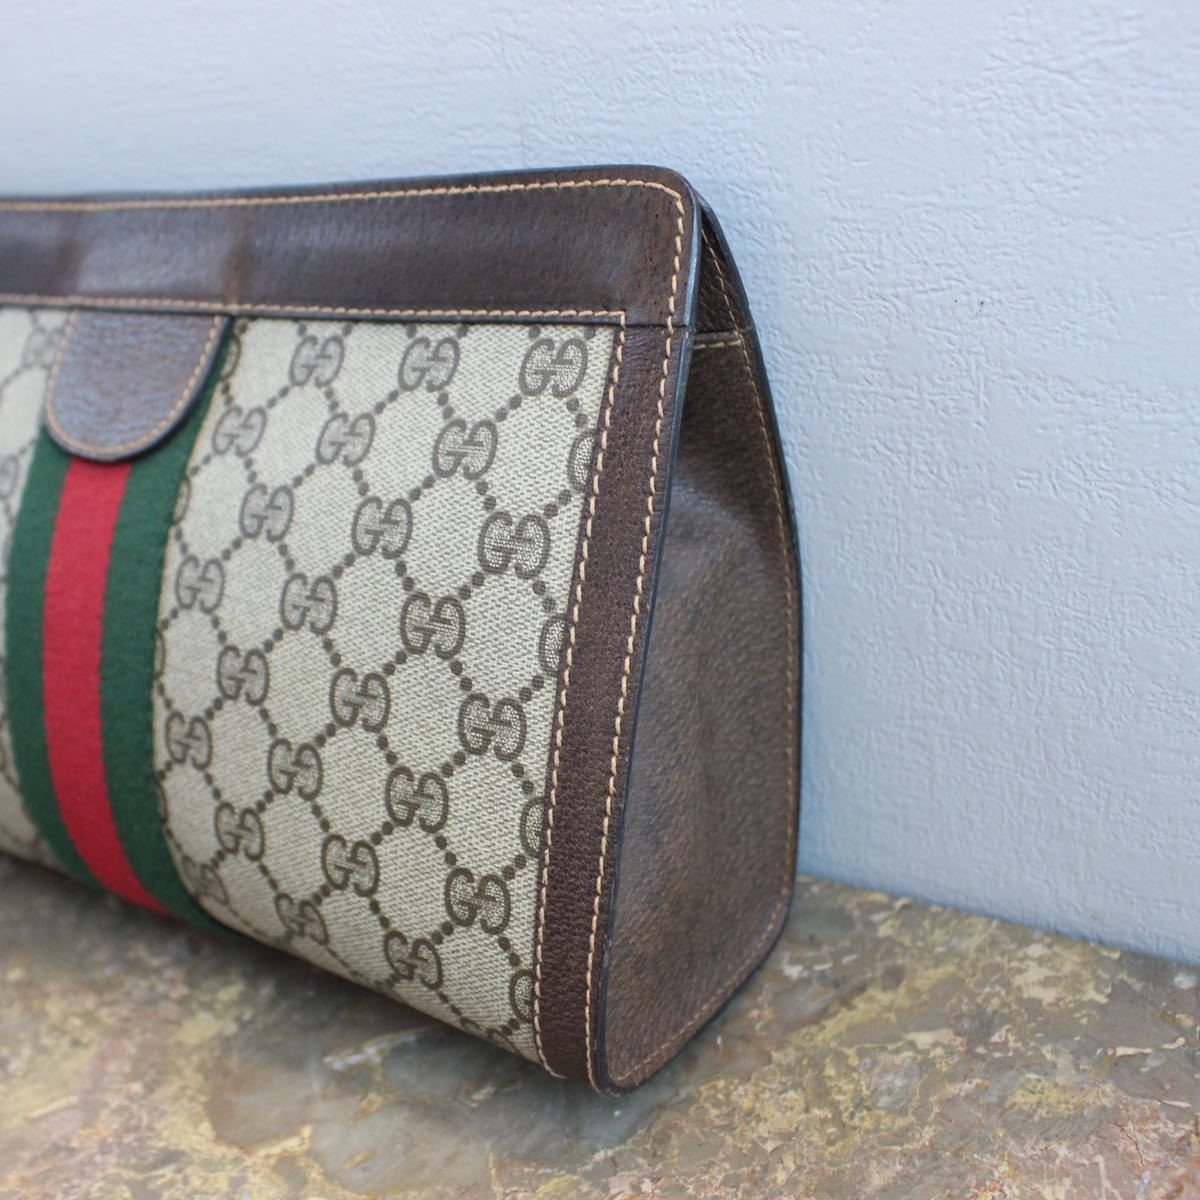 OLD GUCCI SHERRY LINE GG PATTERNED CLUTCH BAG MADE IN  ITALY/オールドグッチシェリーラインGG柄クラッチバッグ